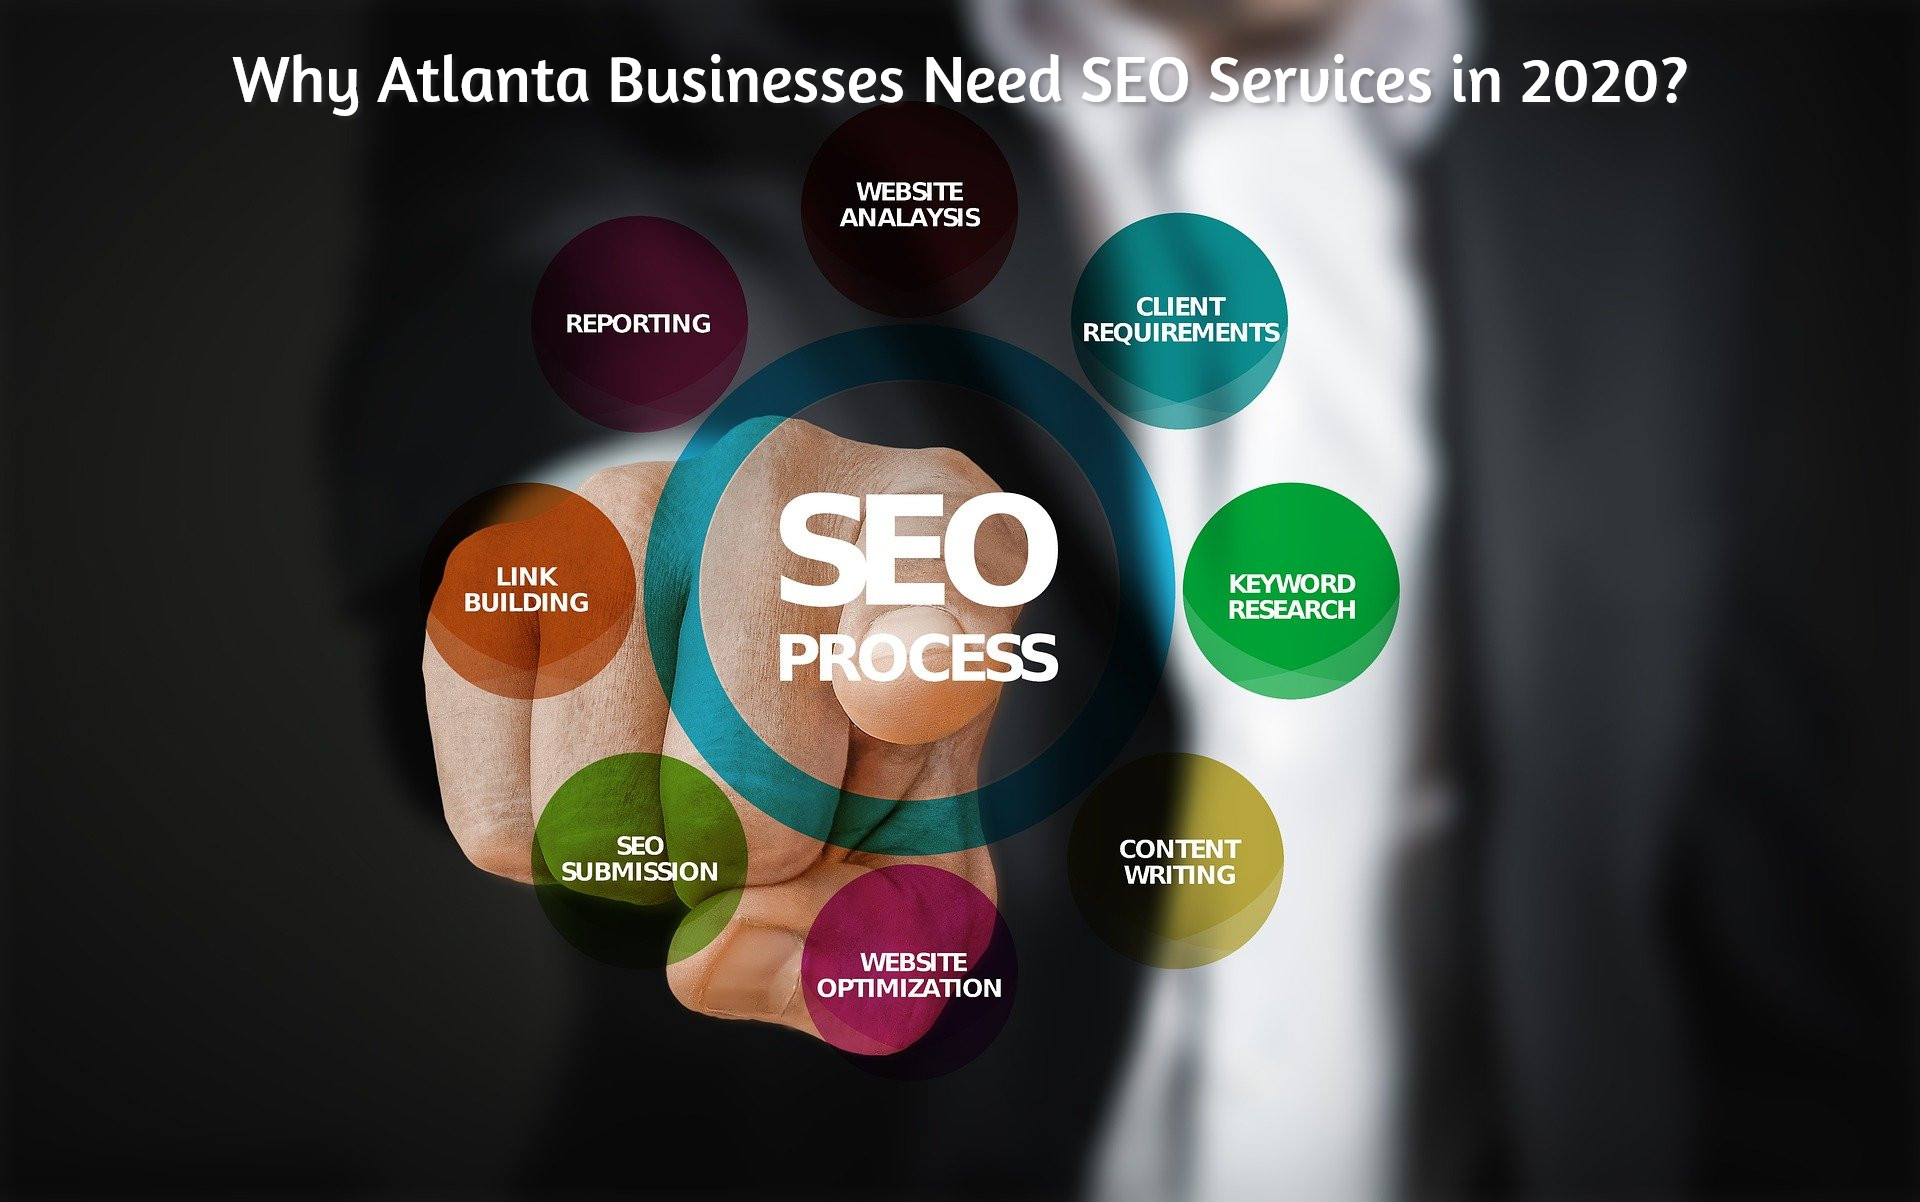 Why Atlanta Businesses Need SEO Services in 2020?